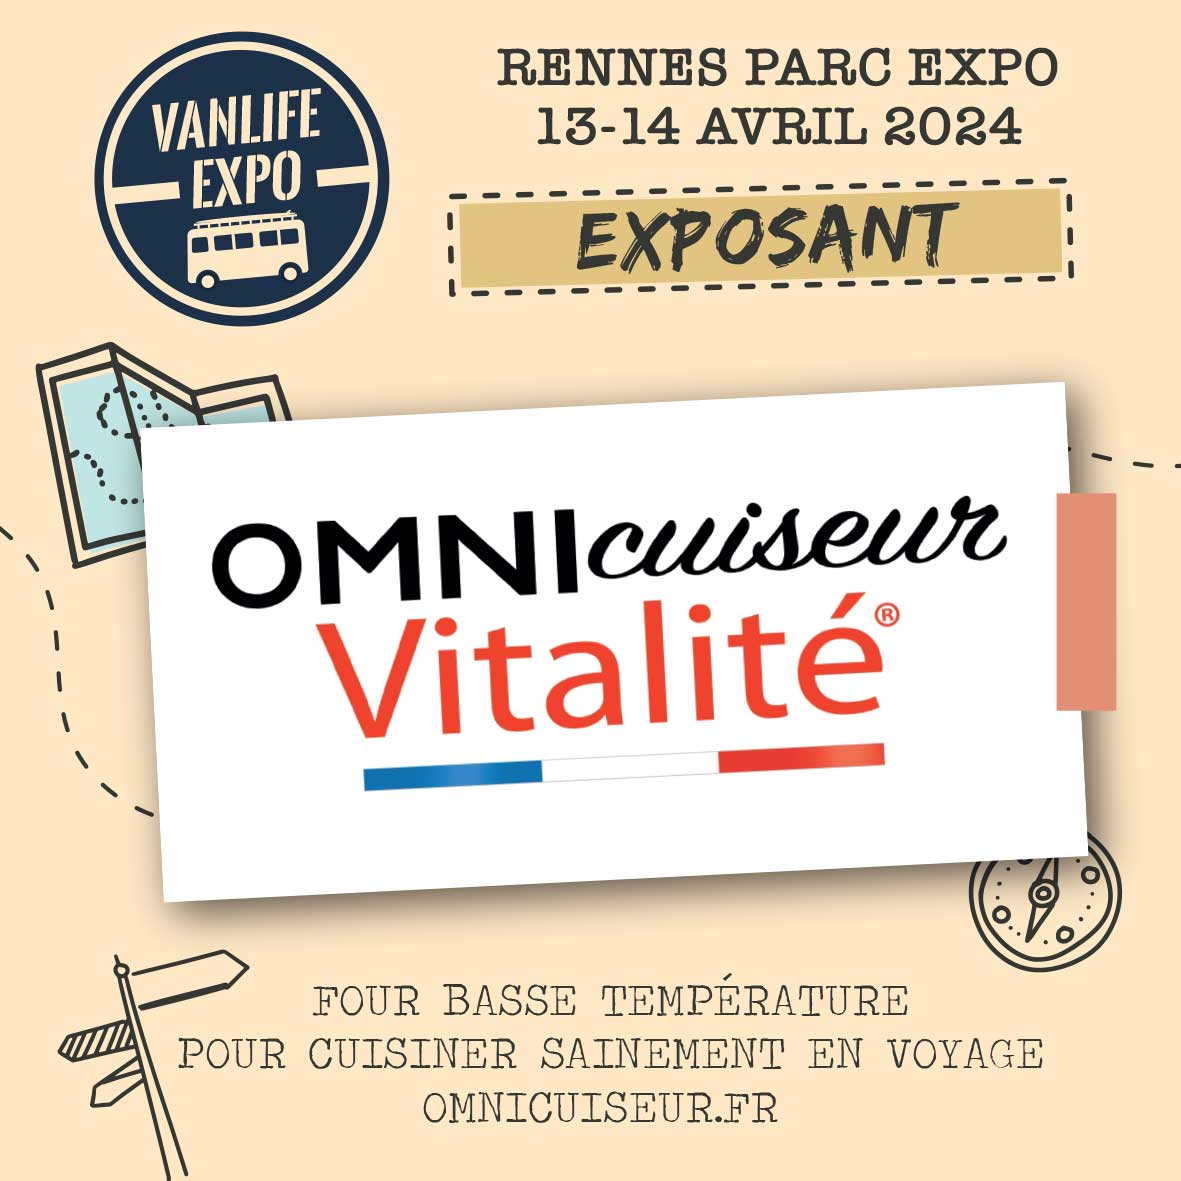 Featured image for “L’omnicuiseur Vitalité”